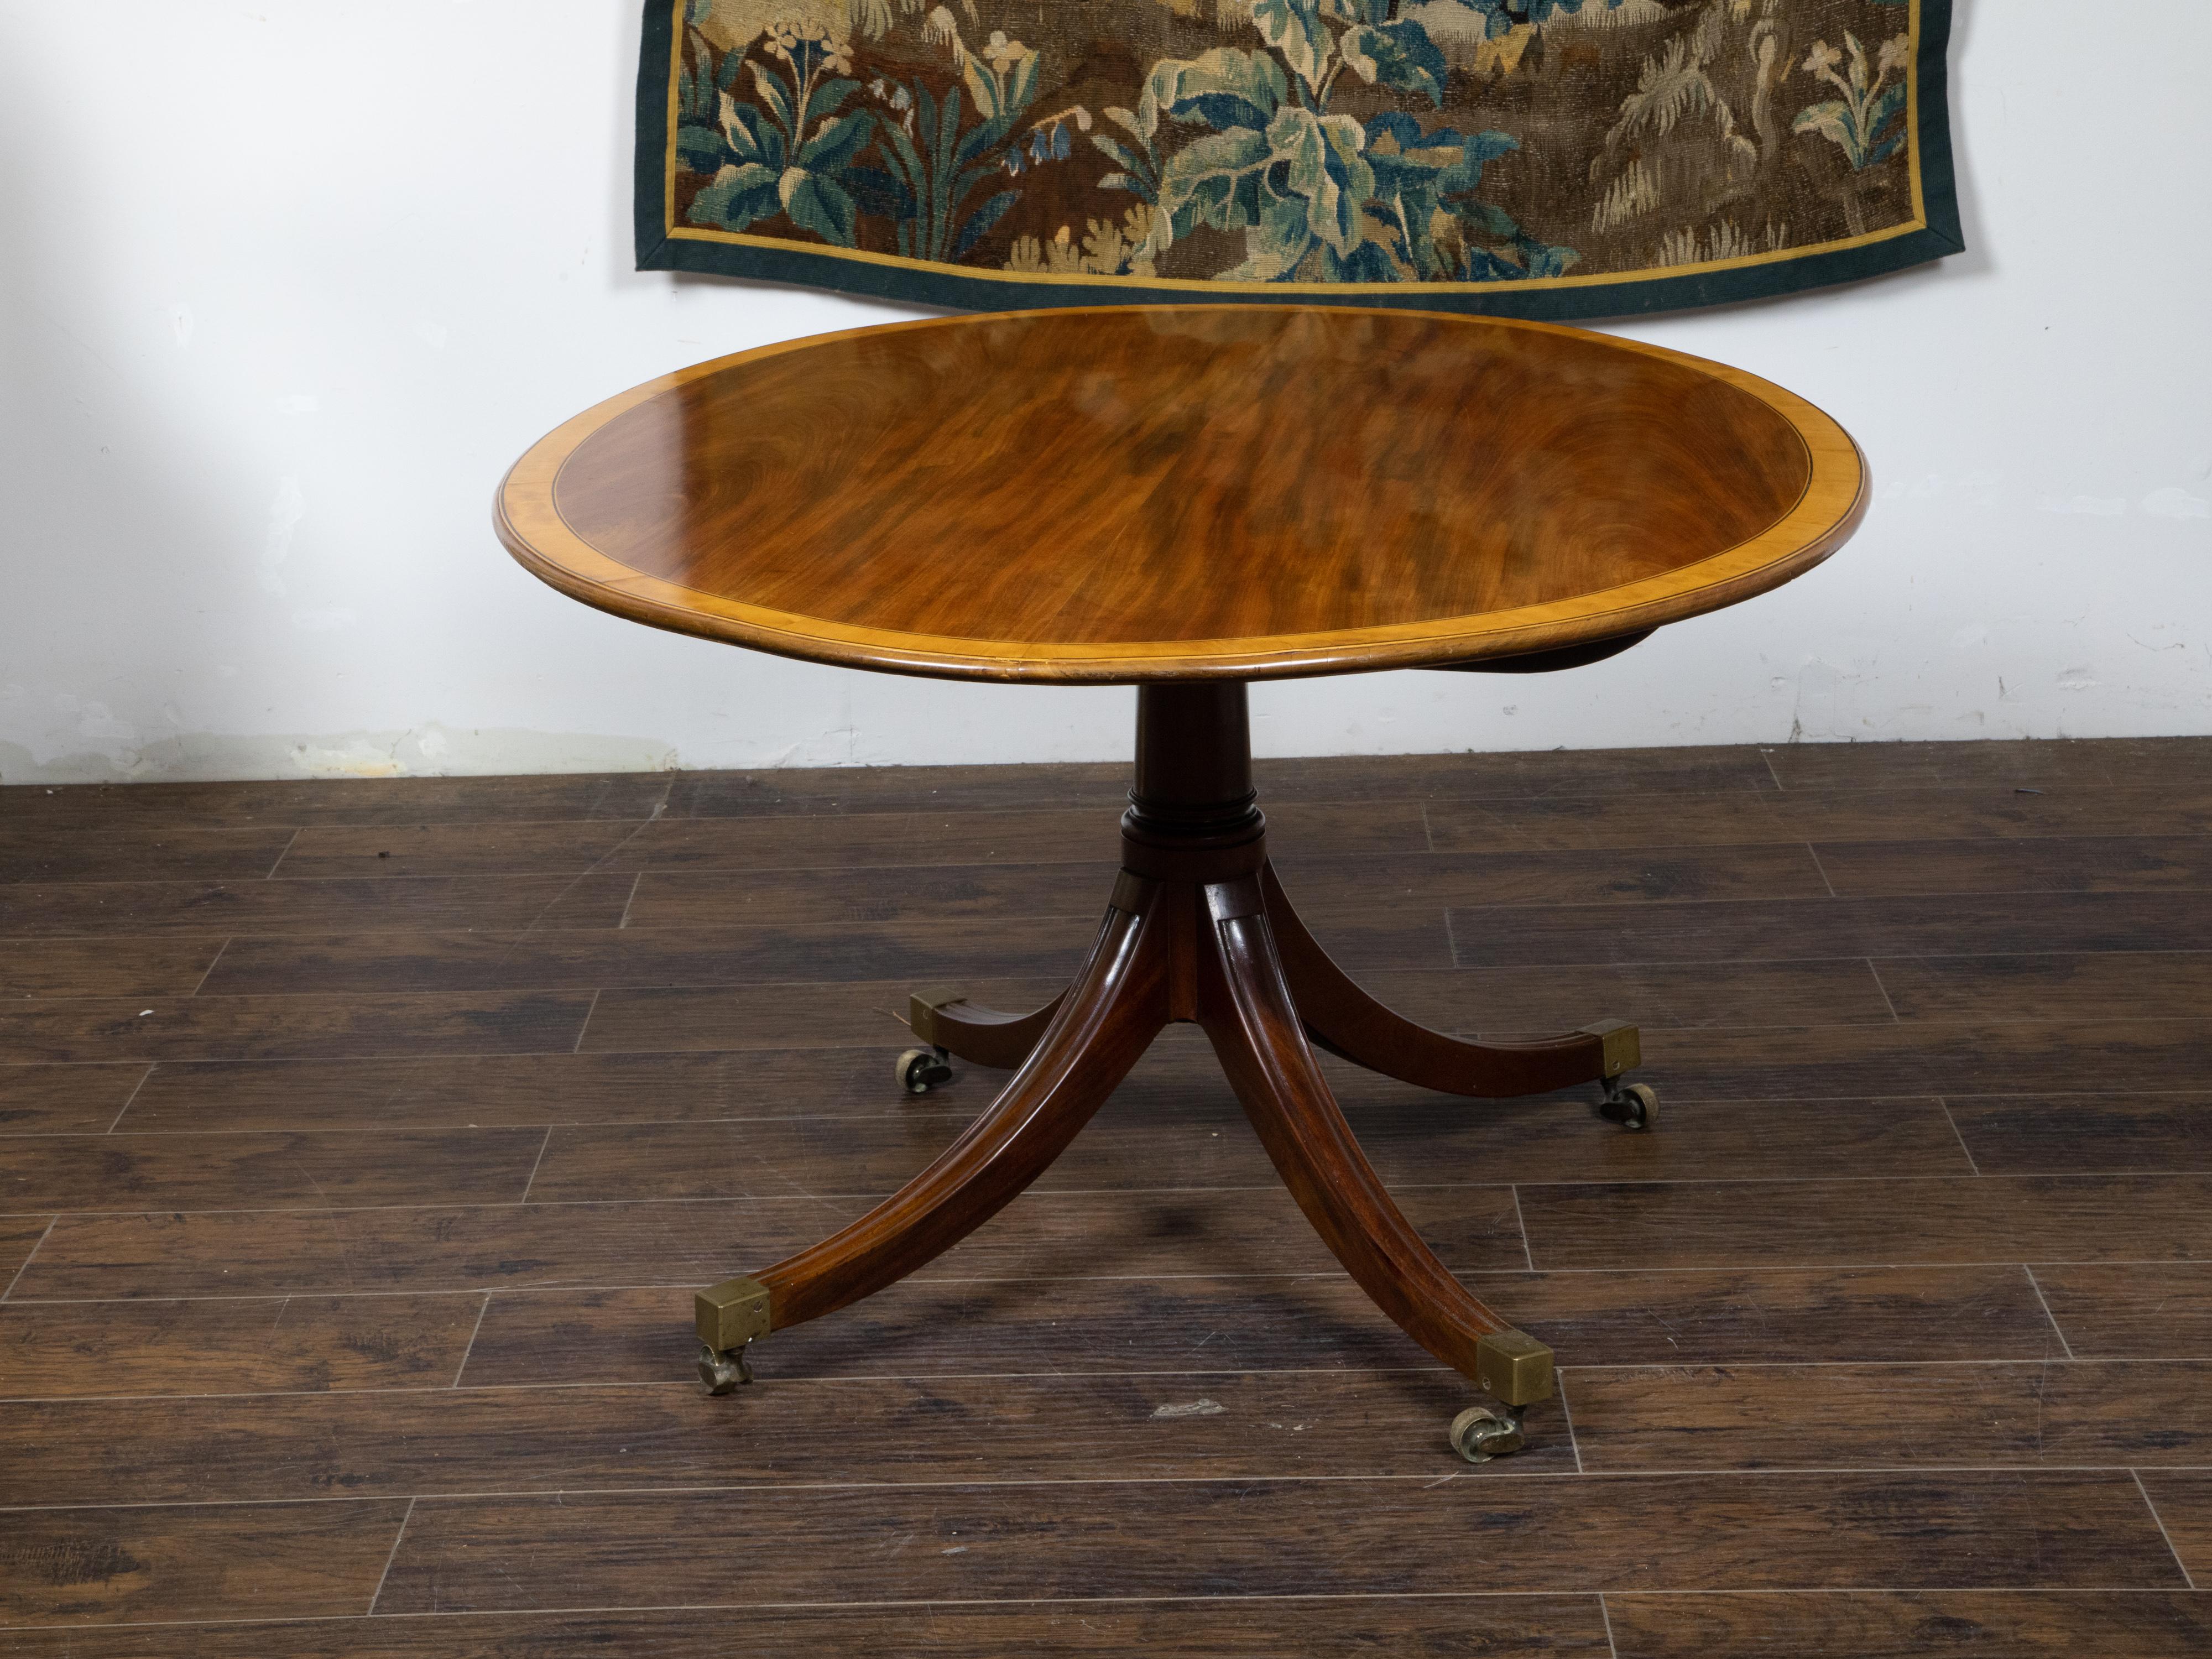 An English mahogany pedestal table from the Mid-19th Century, with oval top, cross banding, quadripod base and brass casters. Created in England during the second quarter of the 19th century, this mahogany table features an exquisite oval top